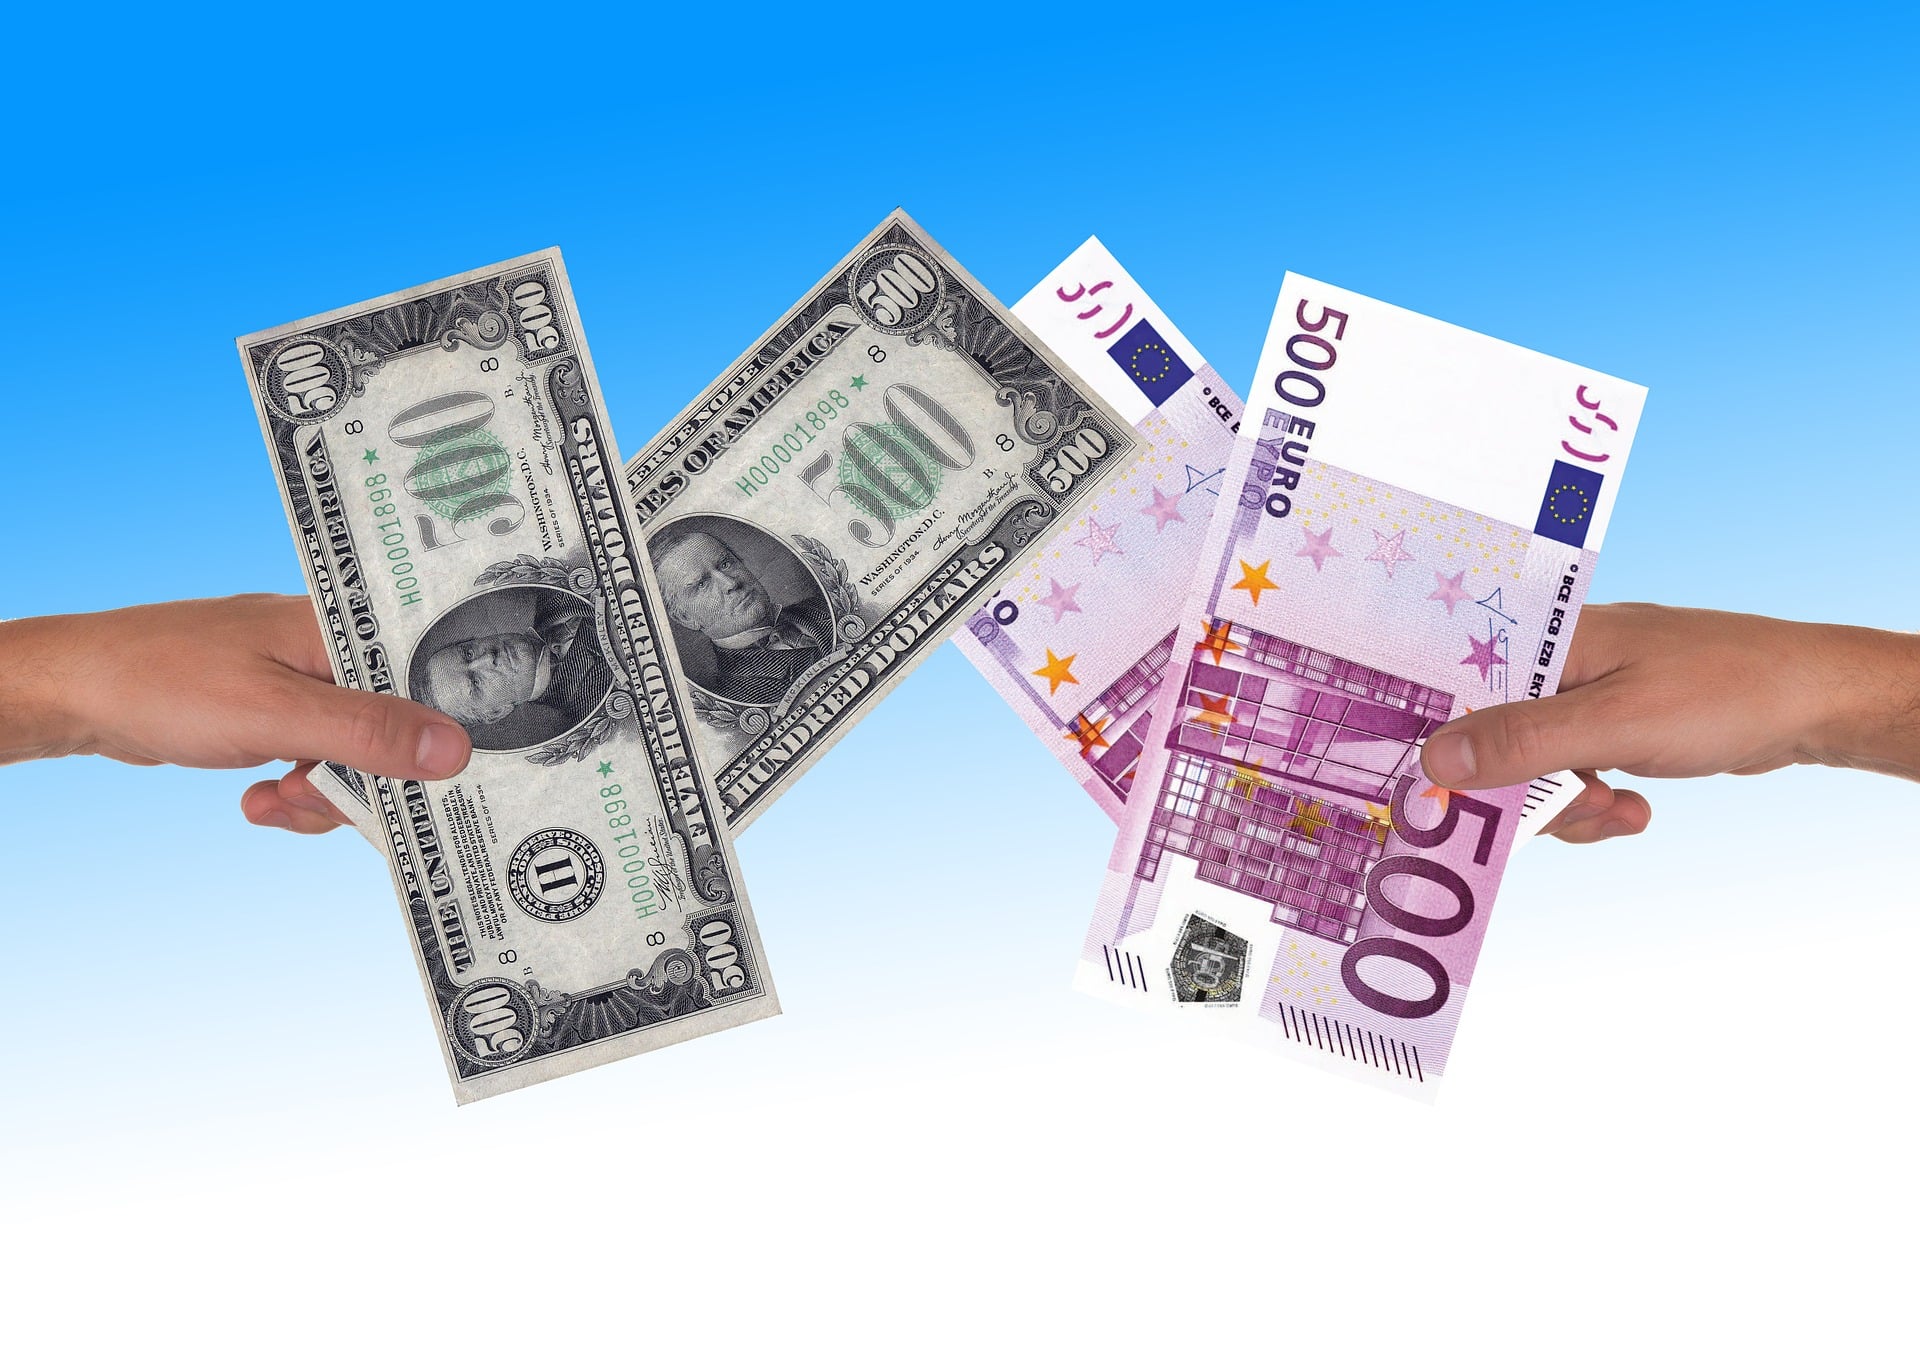 exchange rates are illustrated in this photo showing dollars to euros in two different hands